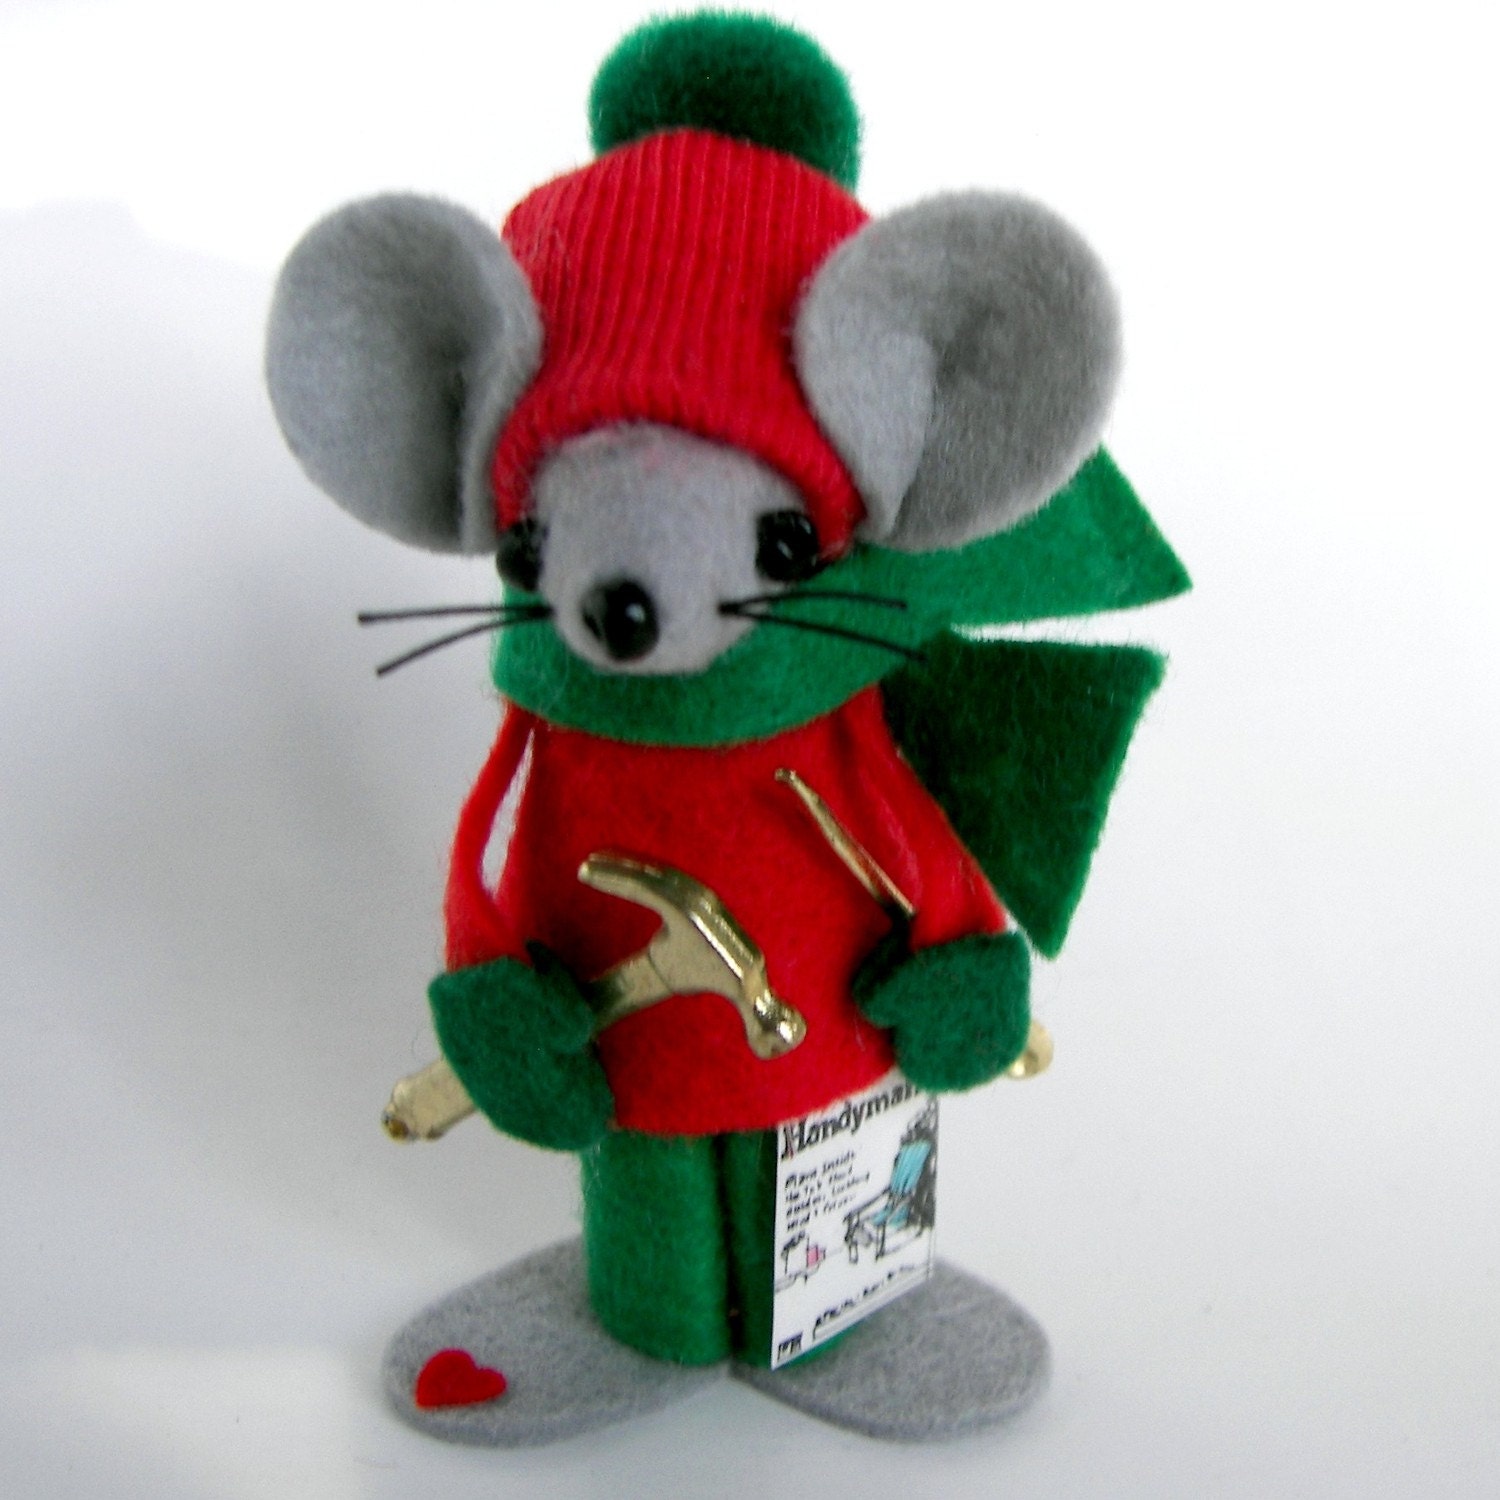 Handyman Mouse Christmas Ornament- felt  mice gifts for animal lovers or collectors - Warmth